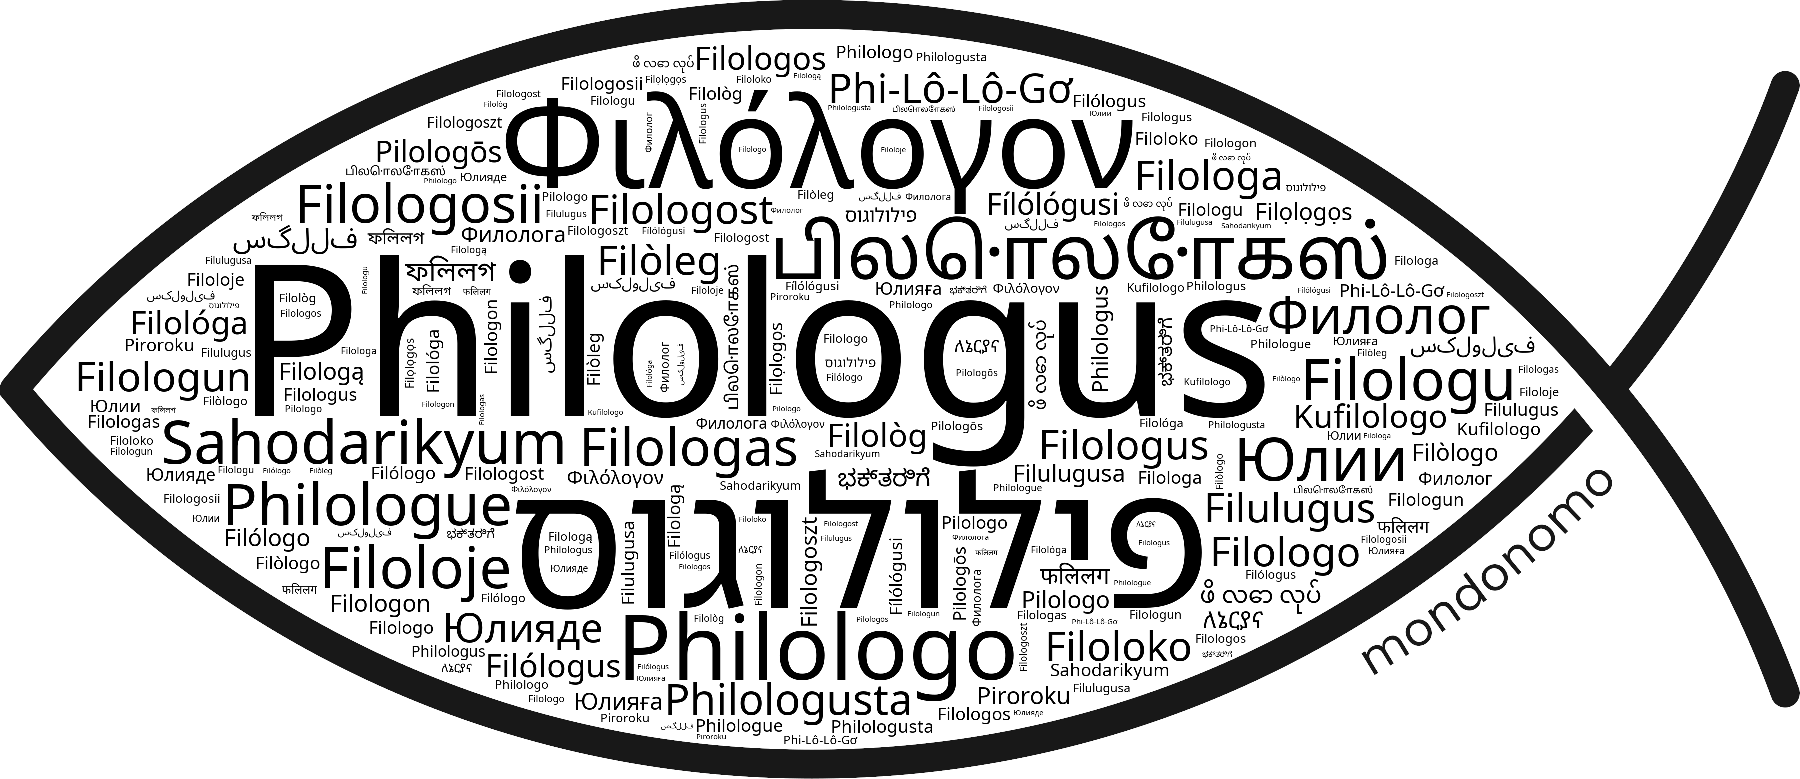 Name Philologus in the world's Bibles